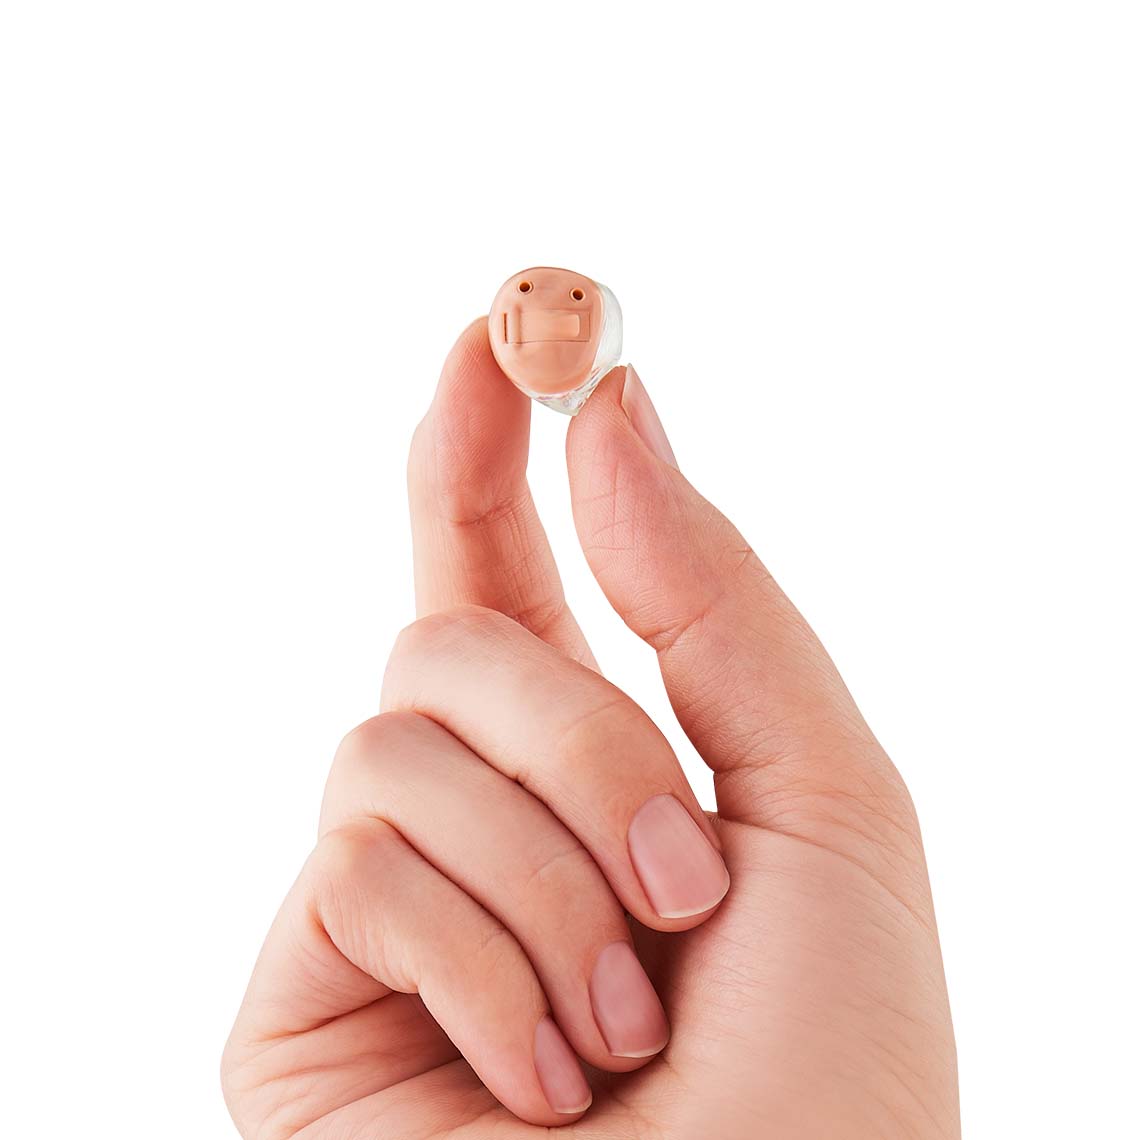 A hand holding a ITC hearing aid